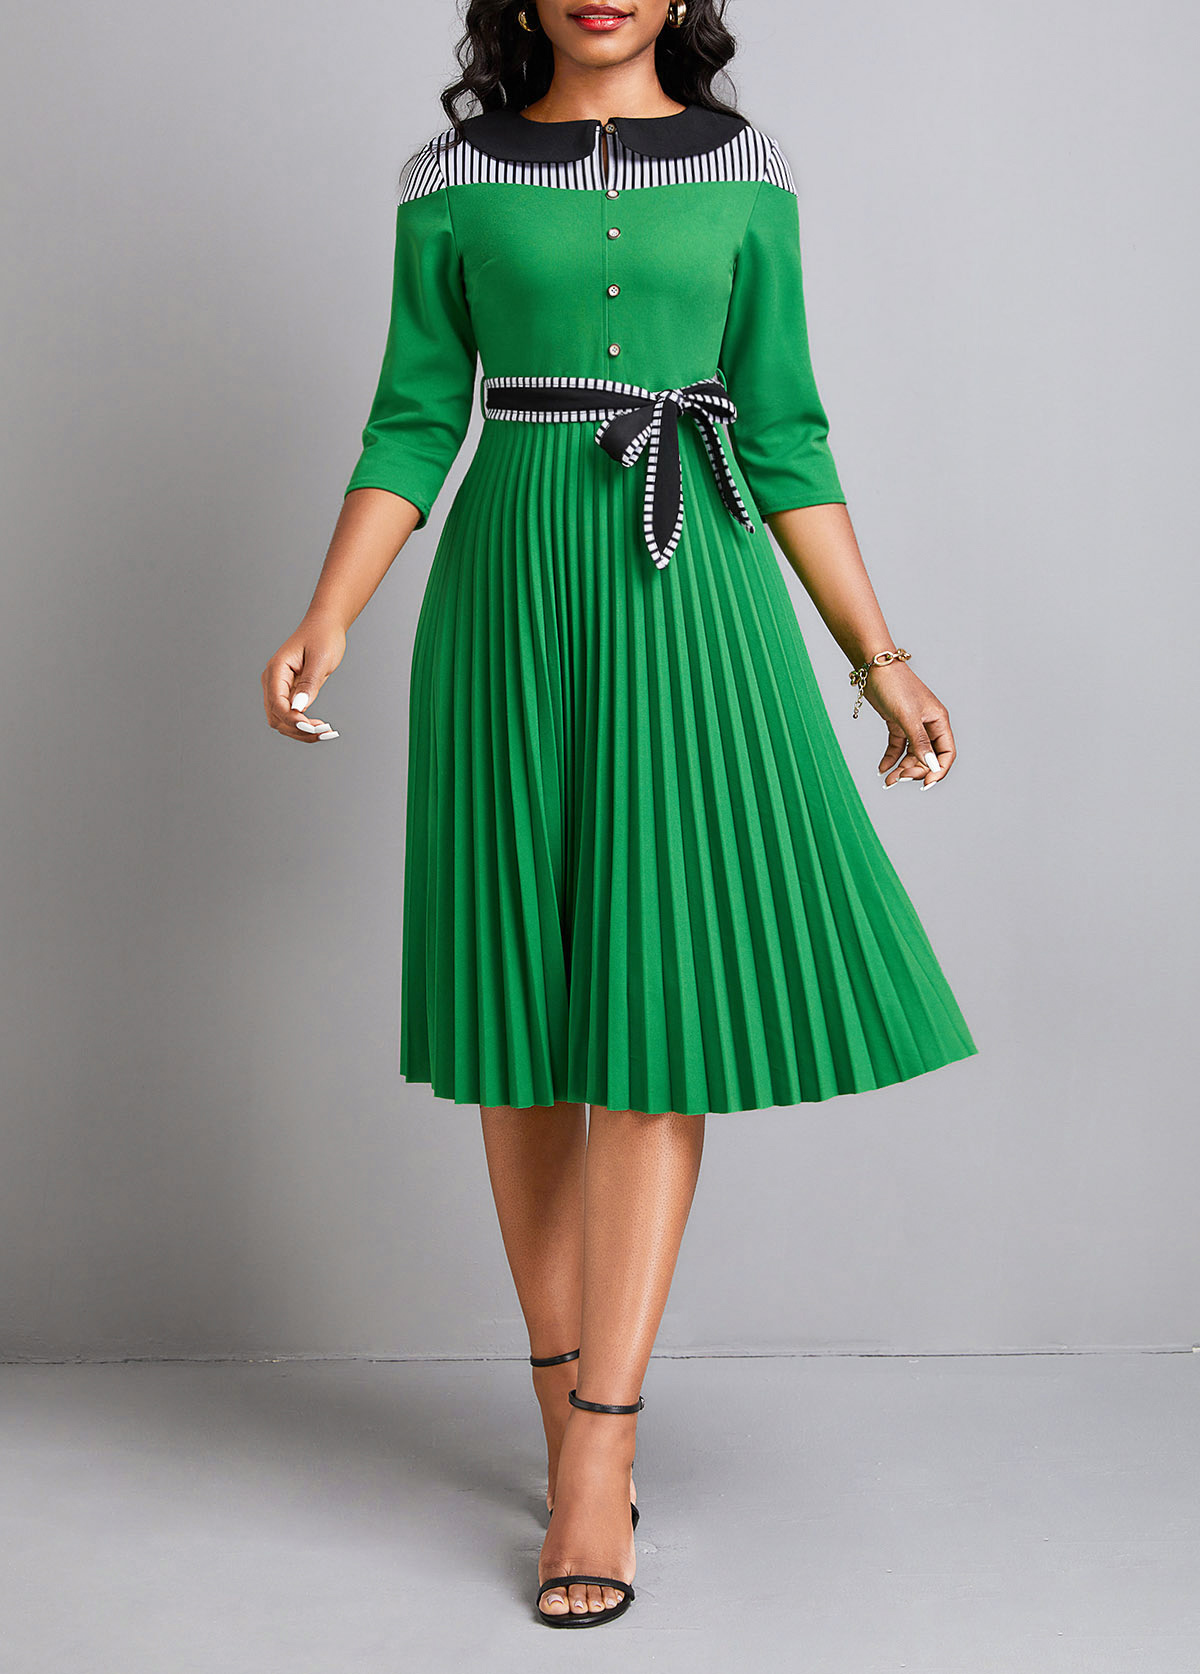 Striped Pleated Belted Green Peter Pan Collar Dress